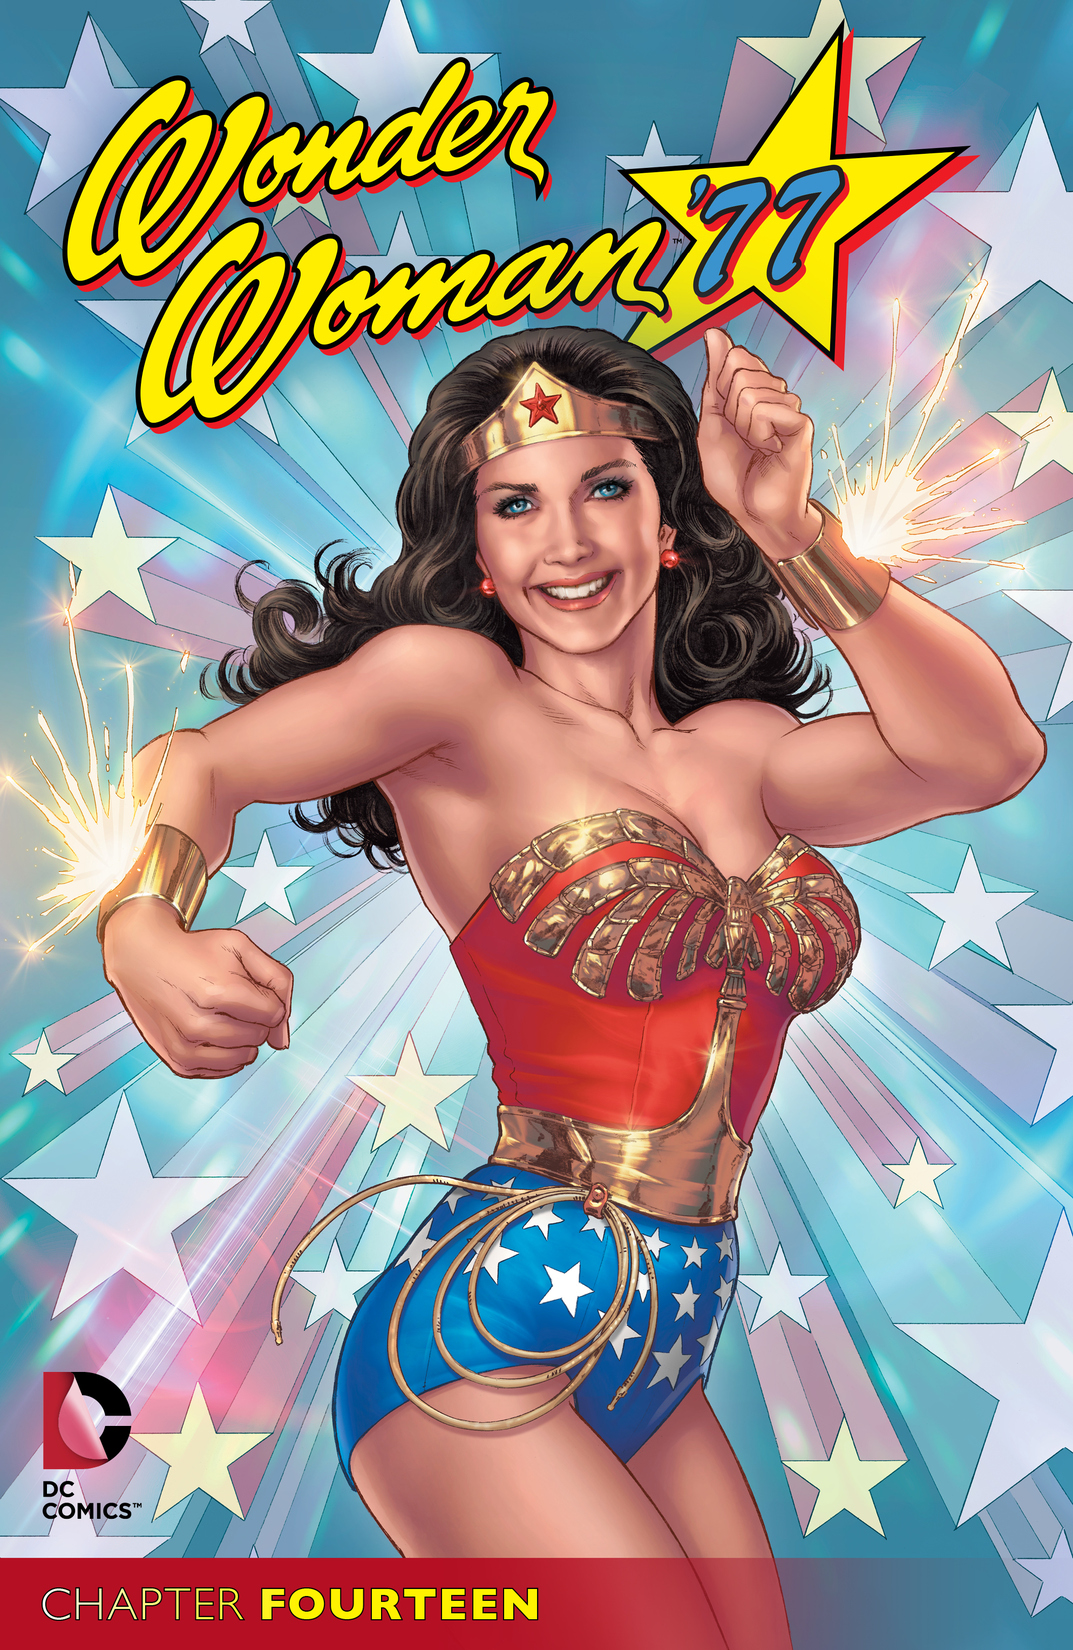 Wonder Woman '77 #14 preview images